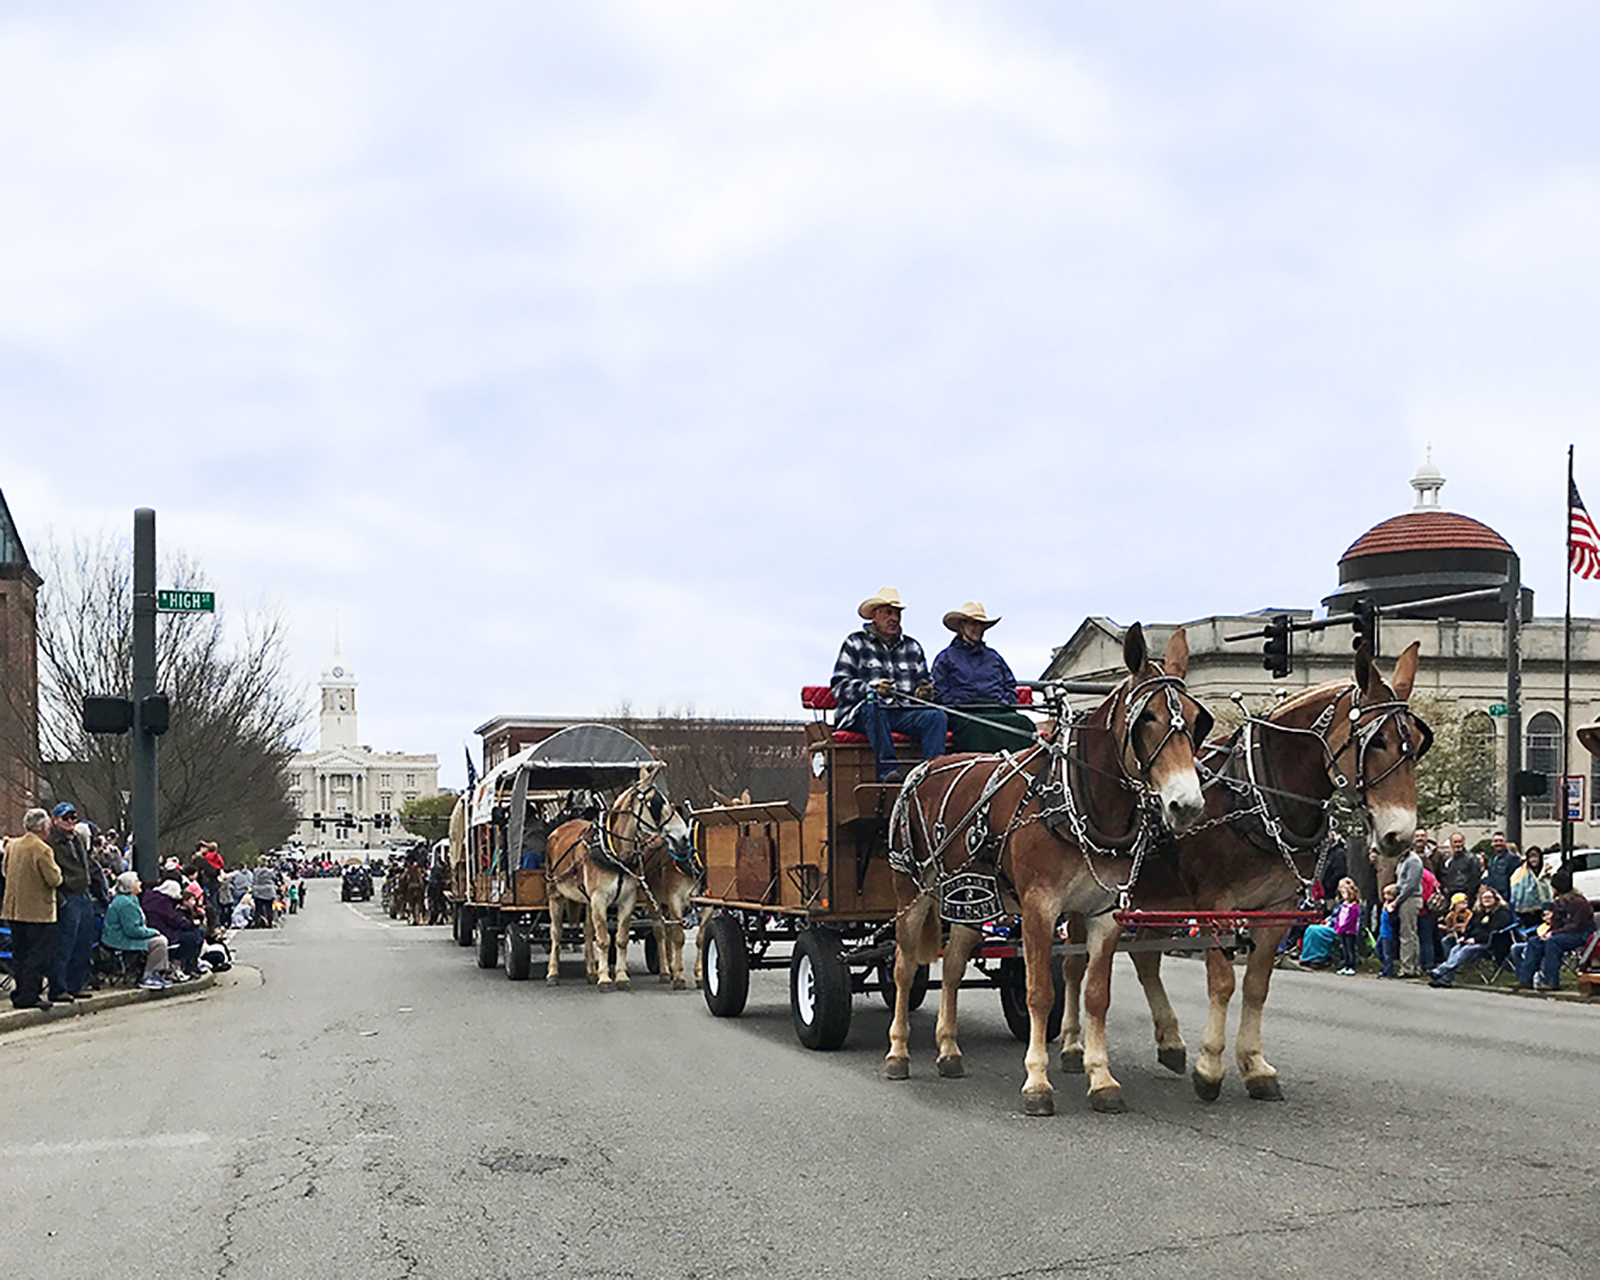 Two mules pulling a wagon down the street in Downtown Columbia TN during the 2017 Mule Day Parade.